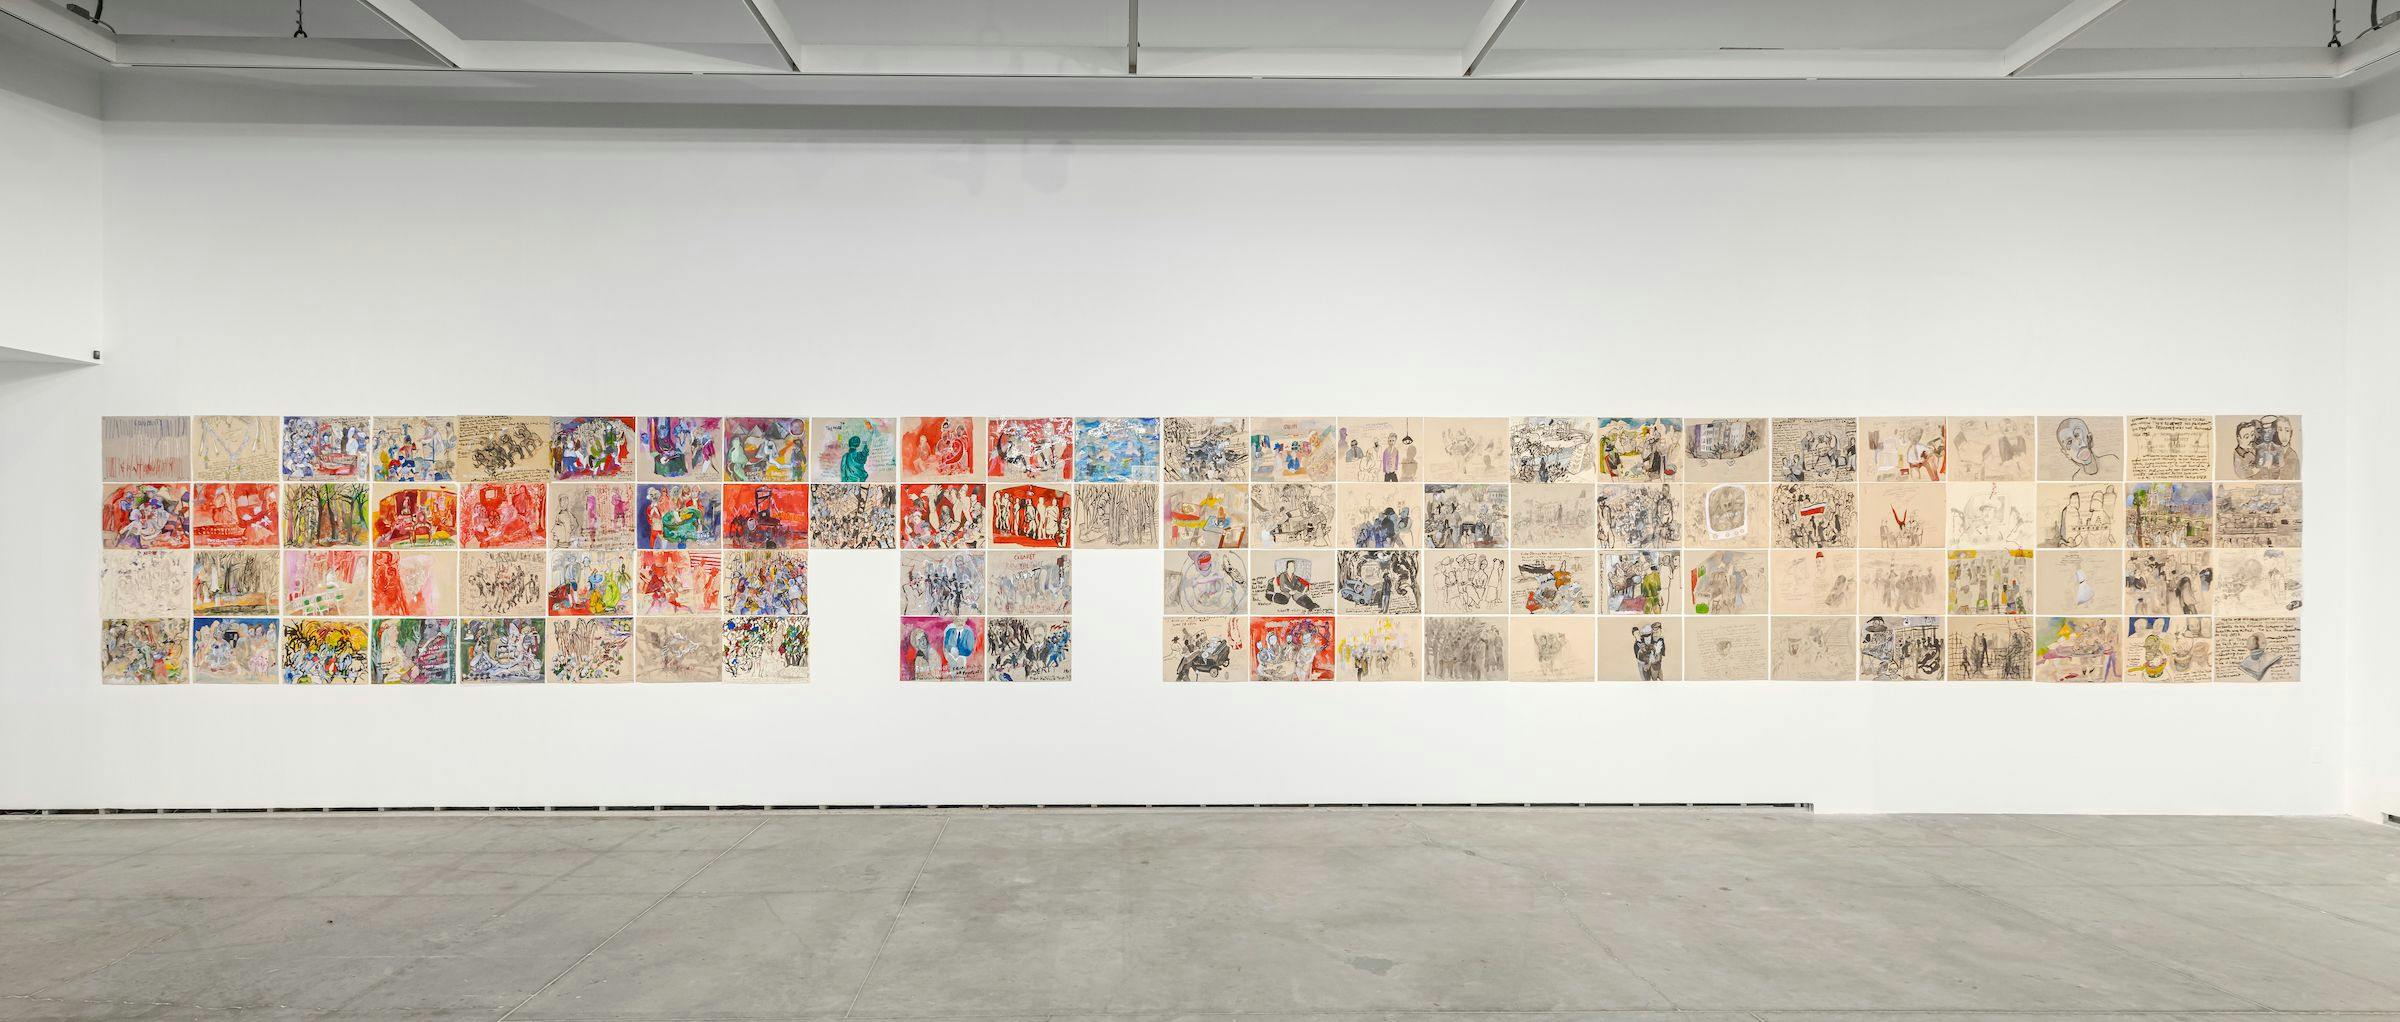 Anna Boghiguian, Time of Change, 2022. Series of 96 drawings. Mixed media on paper. Courtesy the artist. Installation view: Time of Change, The Power Plant Contemporary Art Gallery, Toronto, 2023. Photo: Toni Hafkenscheid.